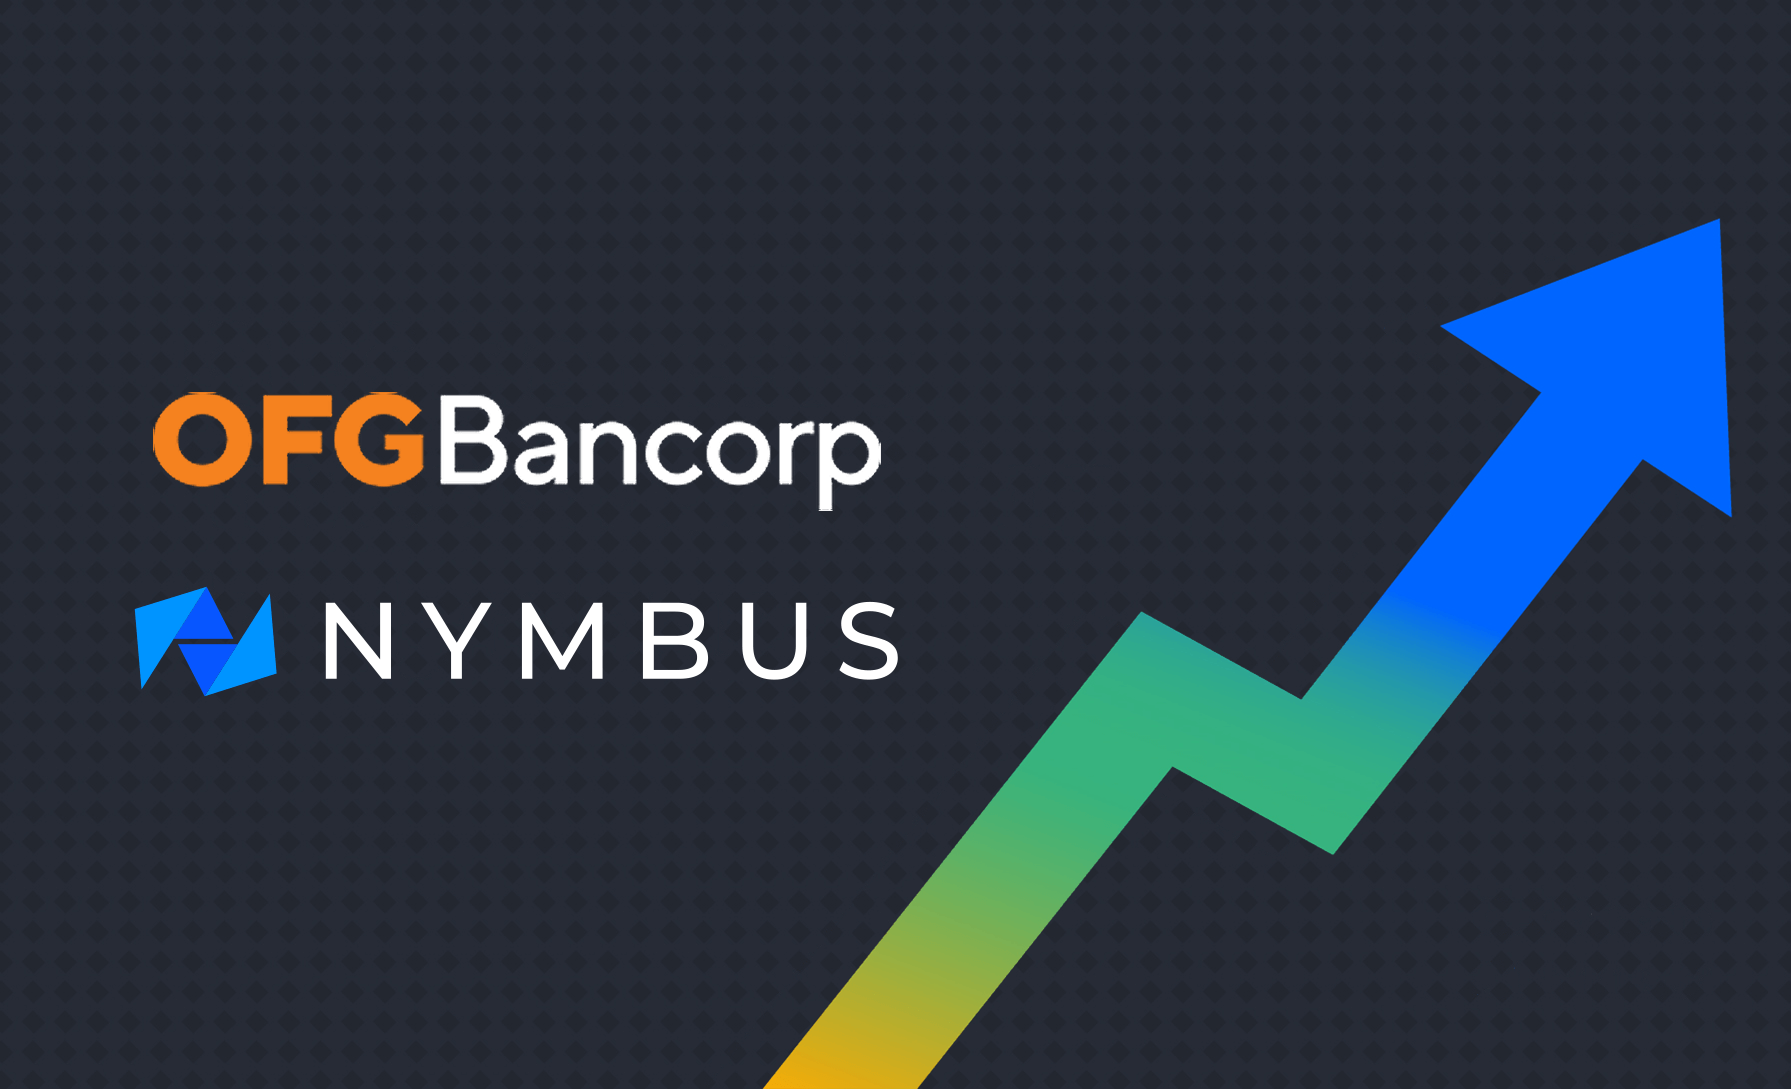 OFG Bancorp Invests $3 Million in Nymbus